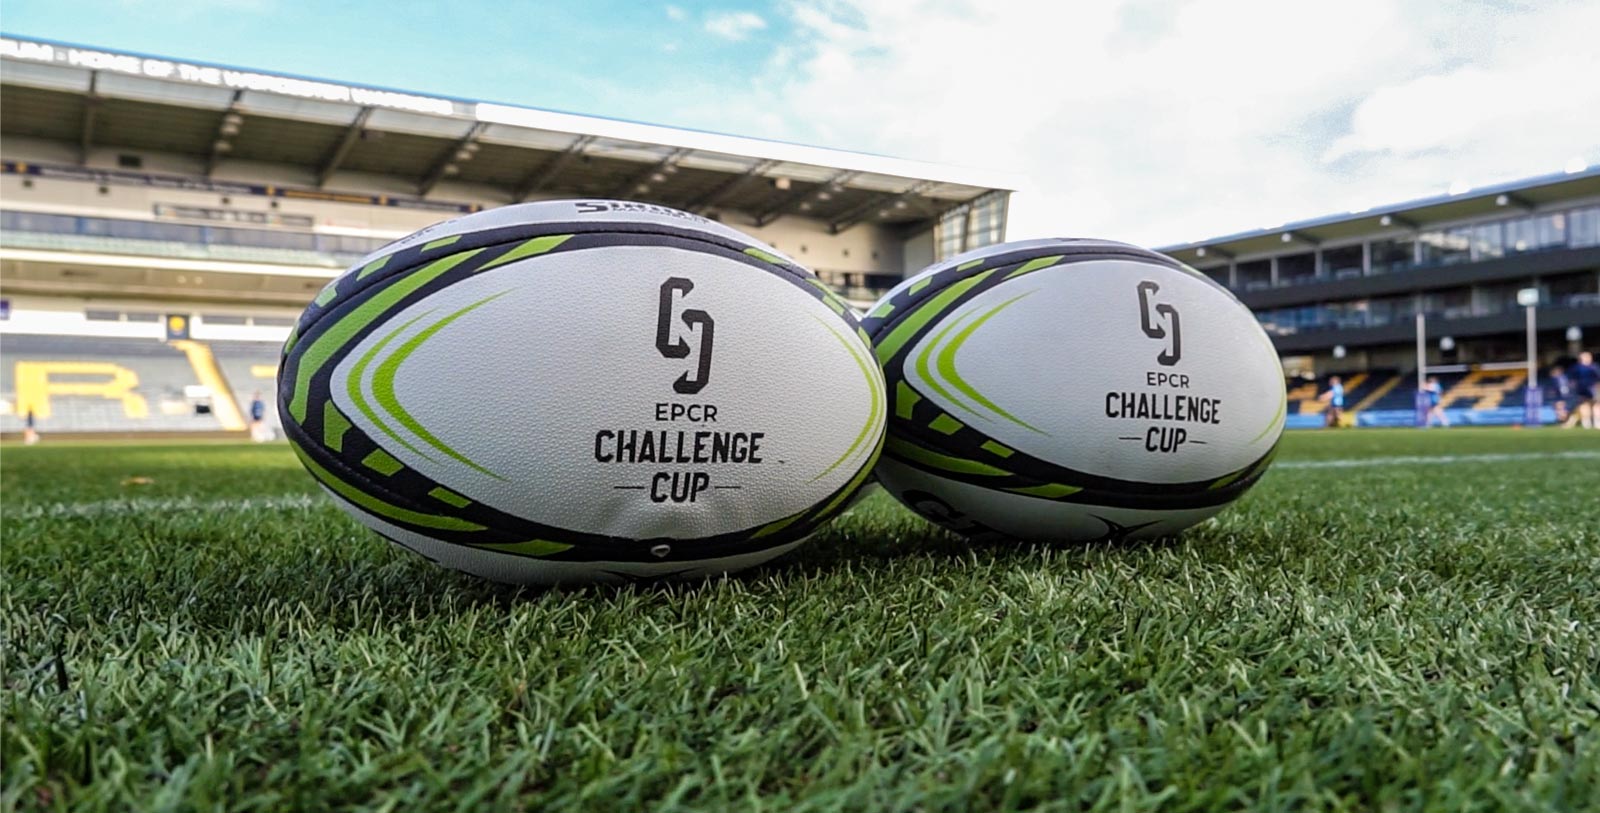 European Challenge Cup format and live stream info